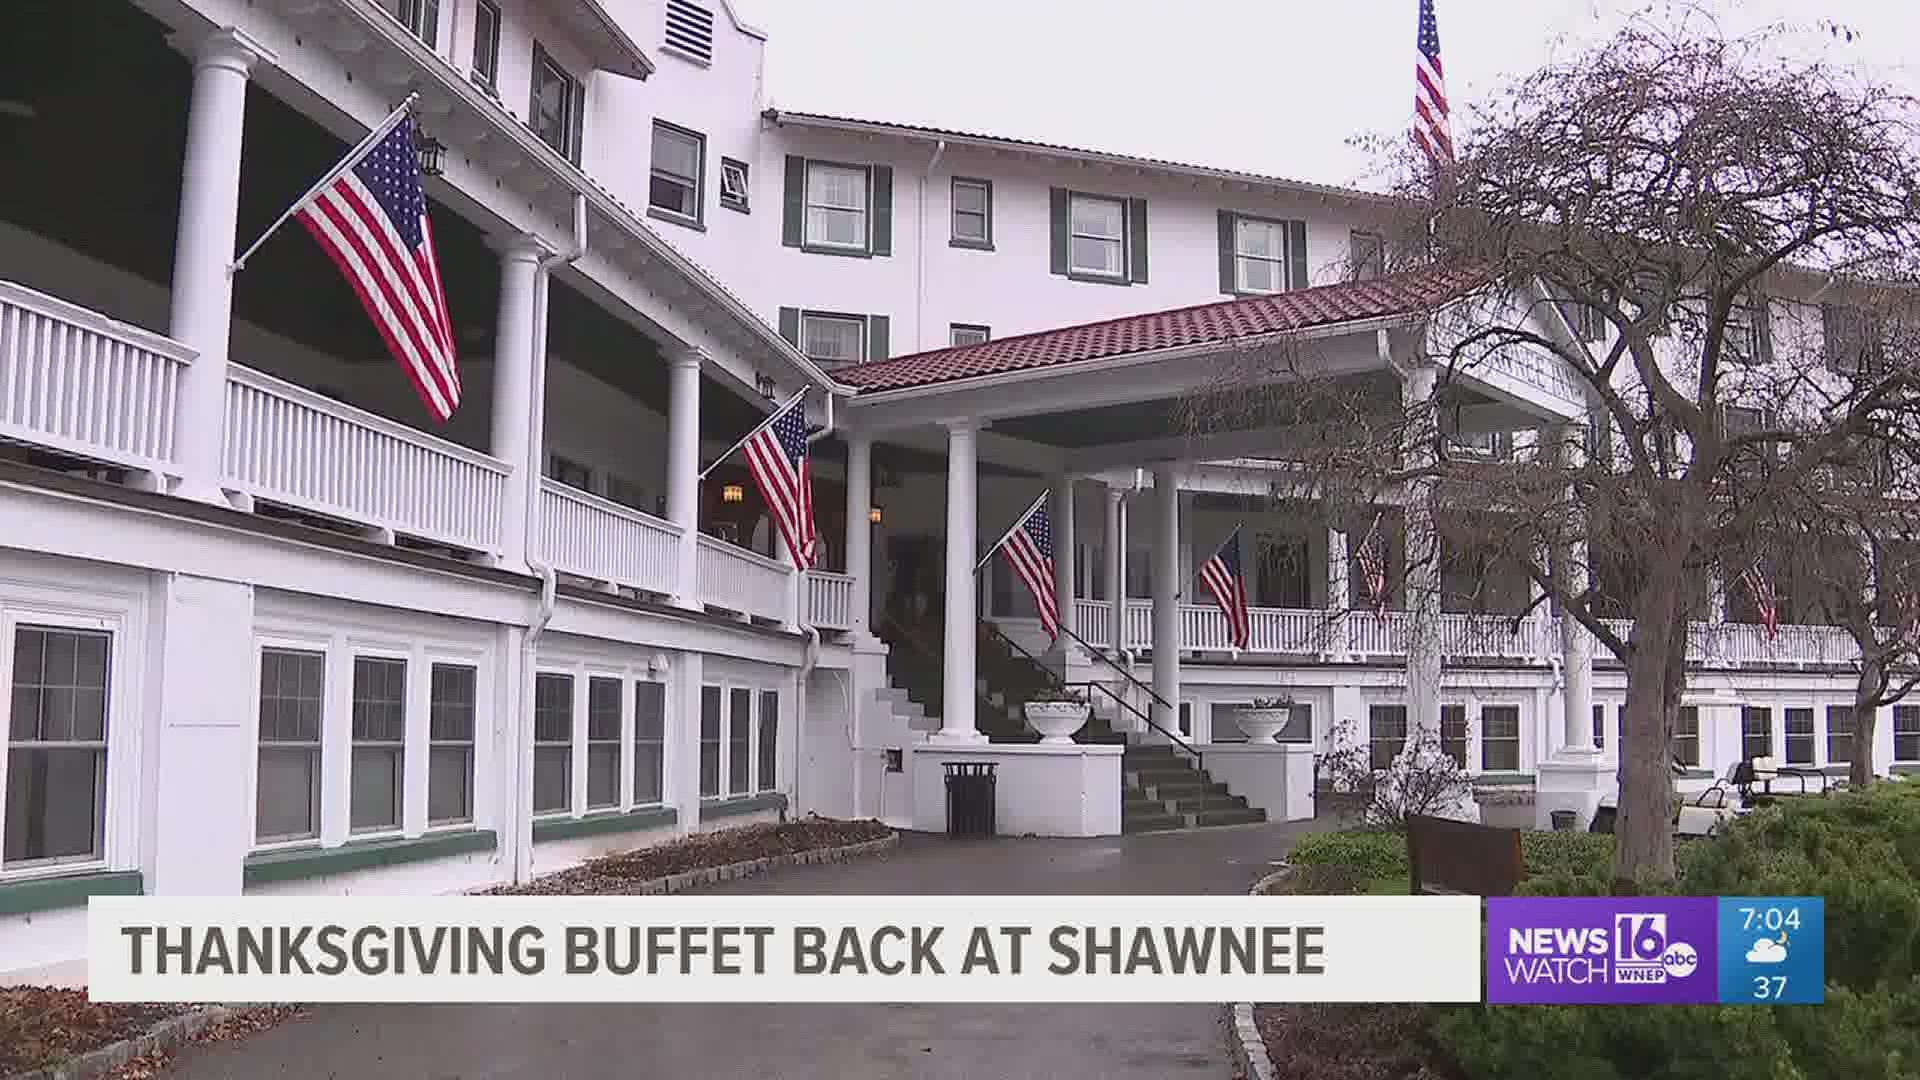 Shawnee Inn and Golf Resort will once again open its buffet for the holiday.